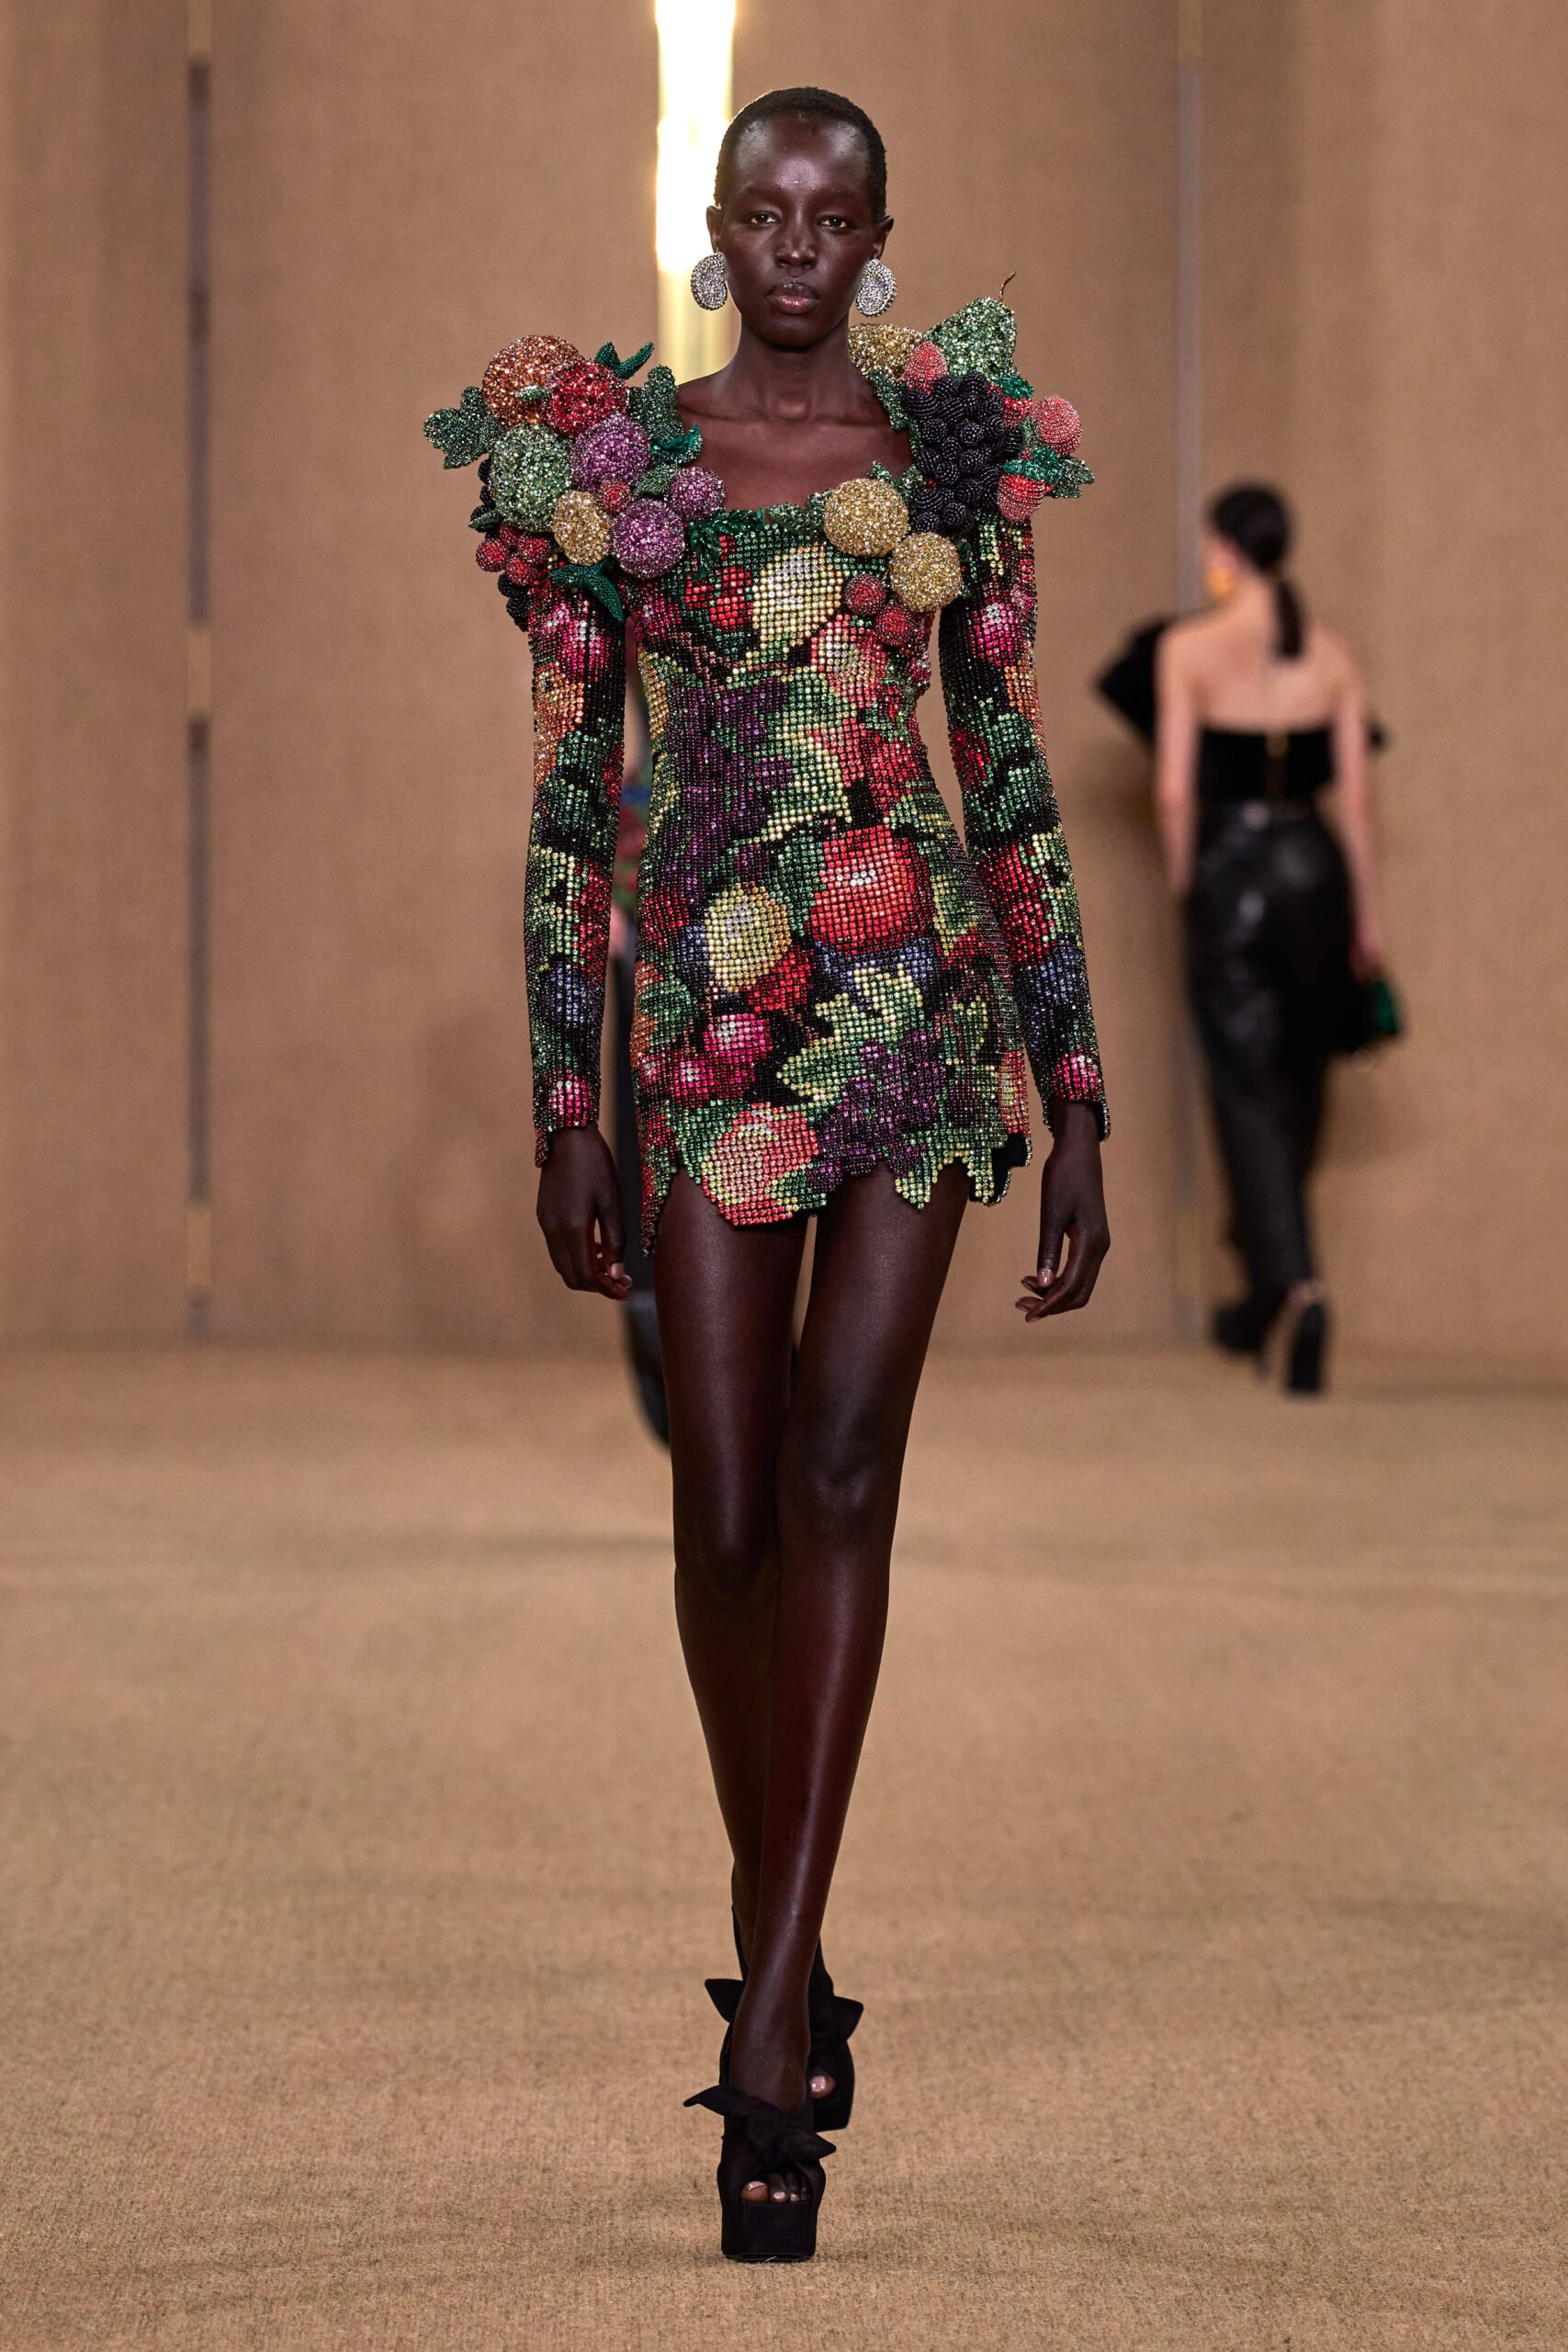 Model on runway in floral inspired dress